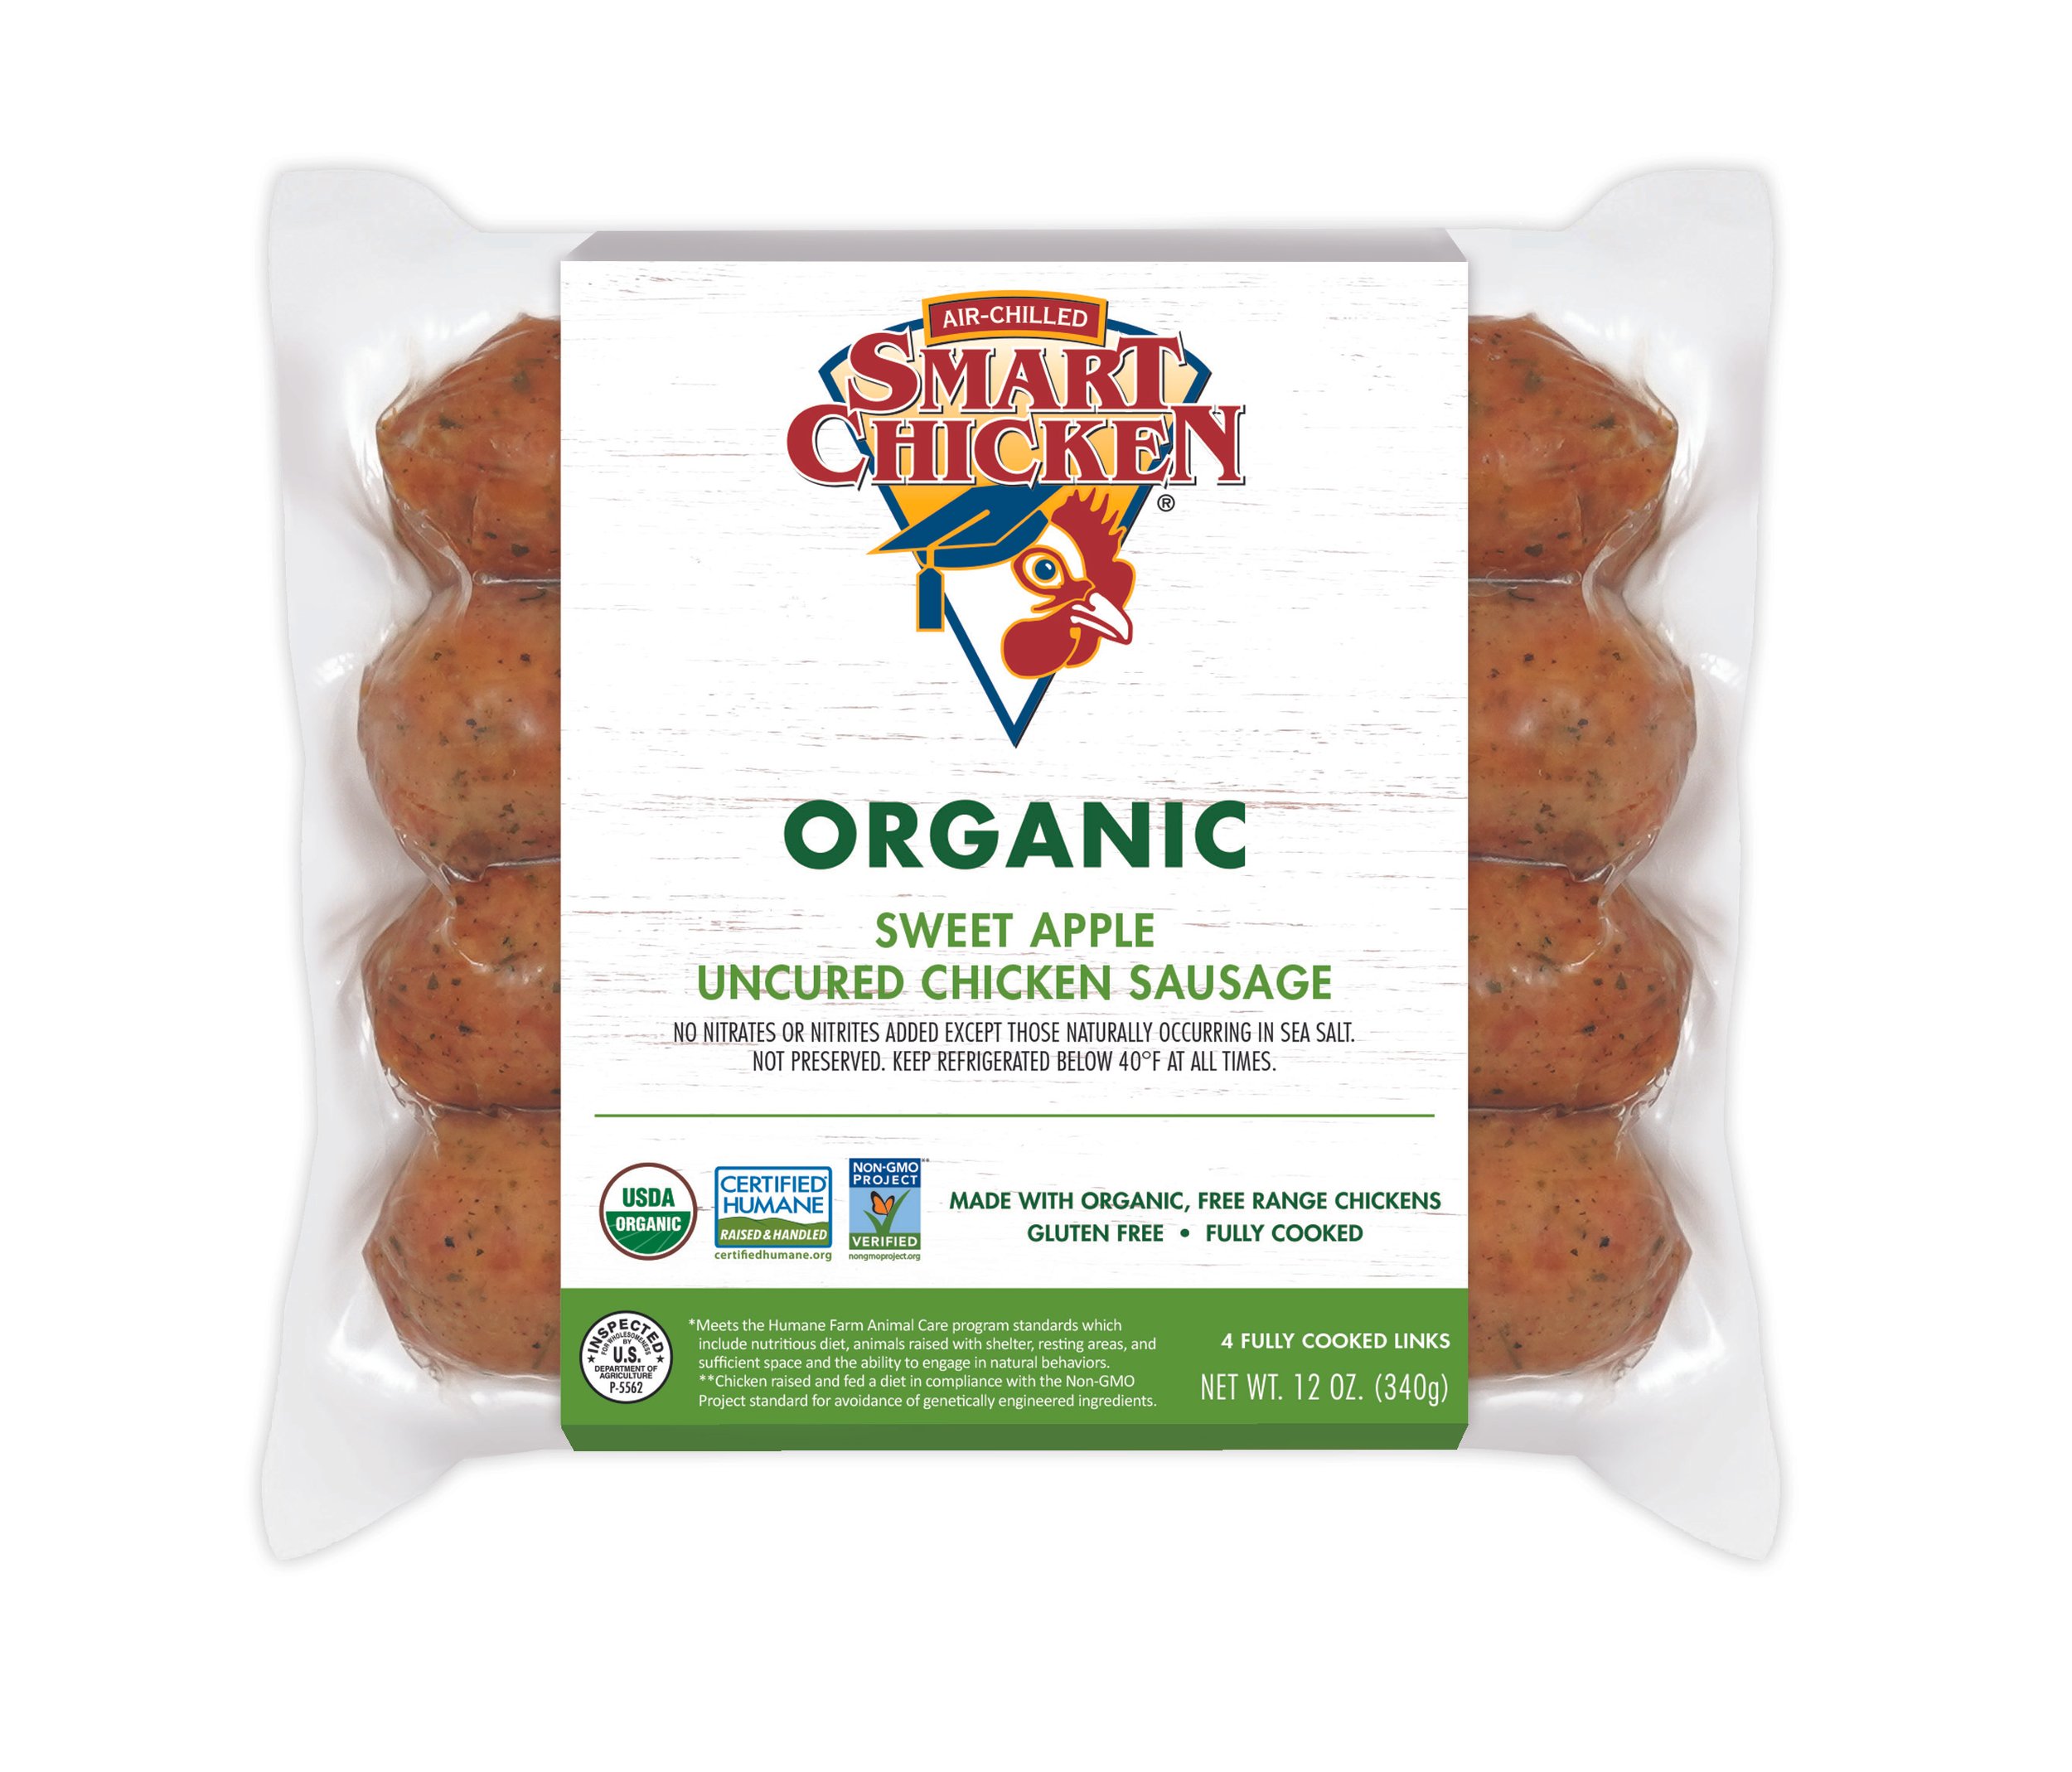 Organic Party Wings, 2 lb, Mary's Free Range